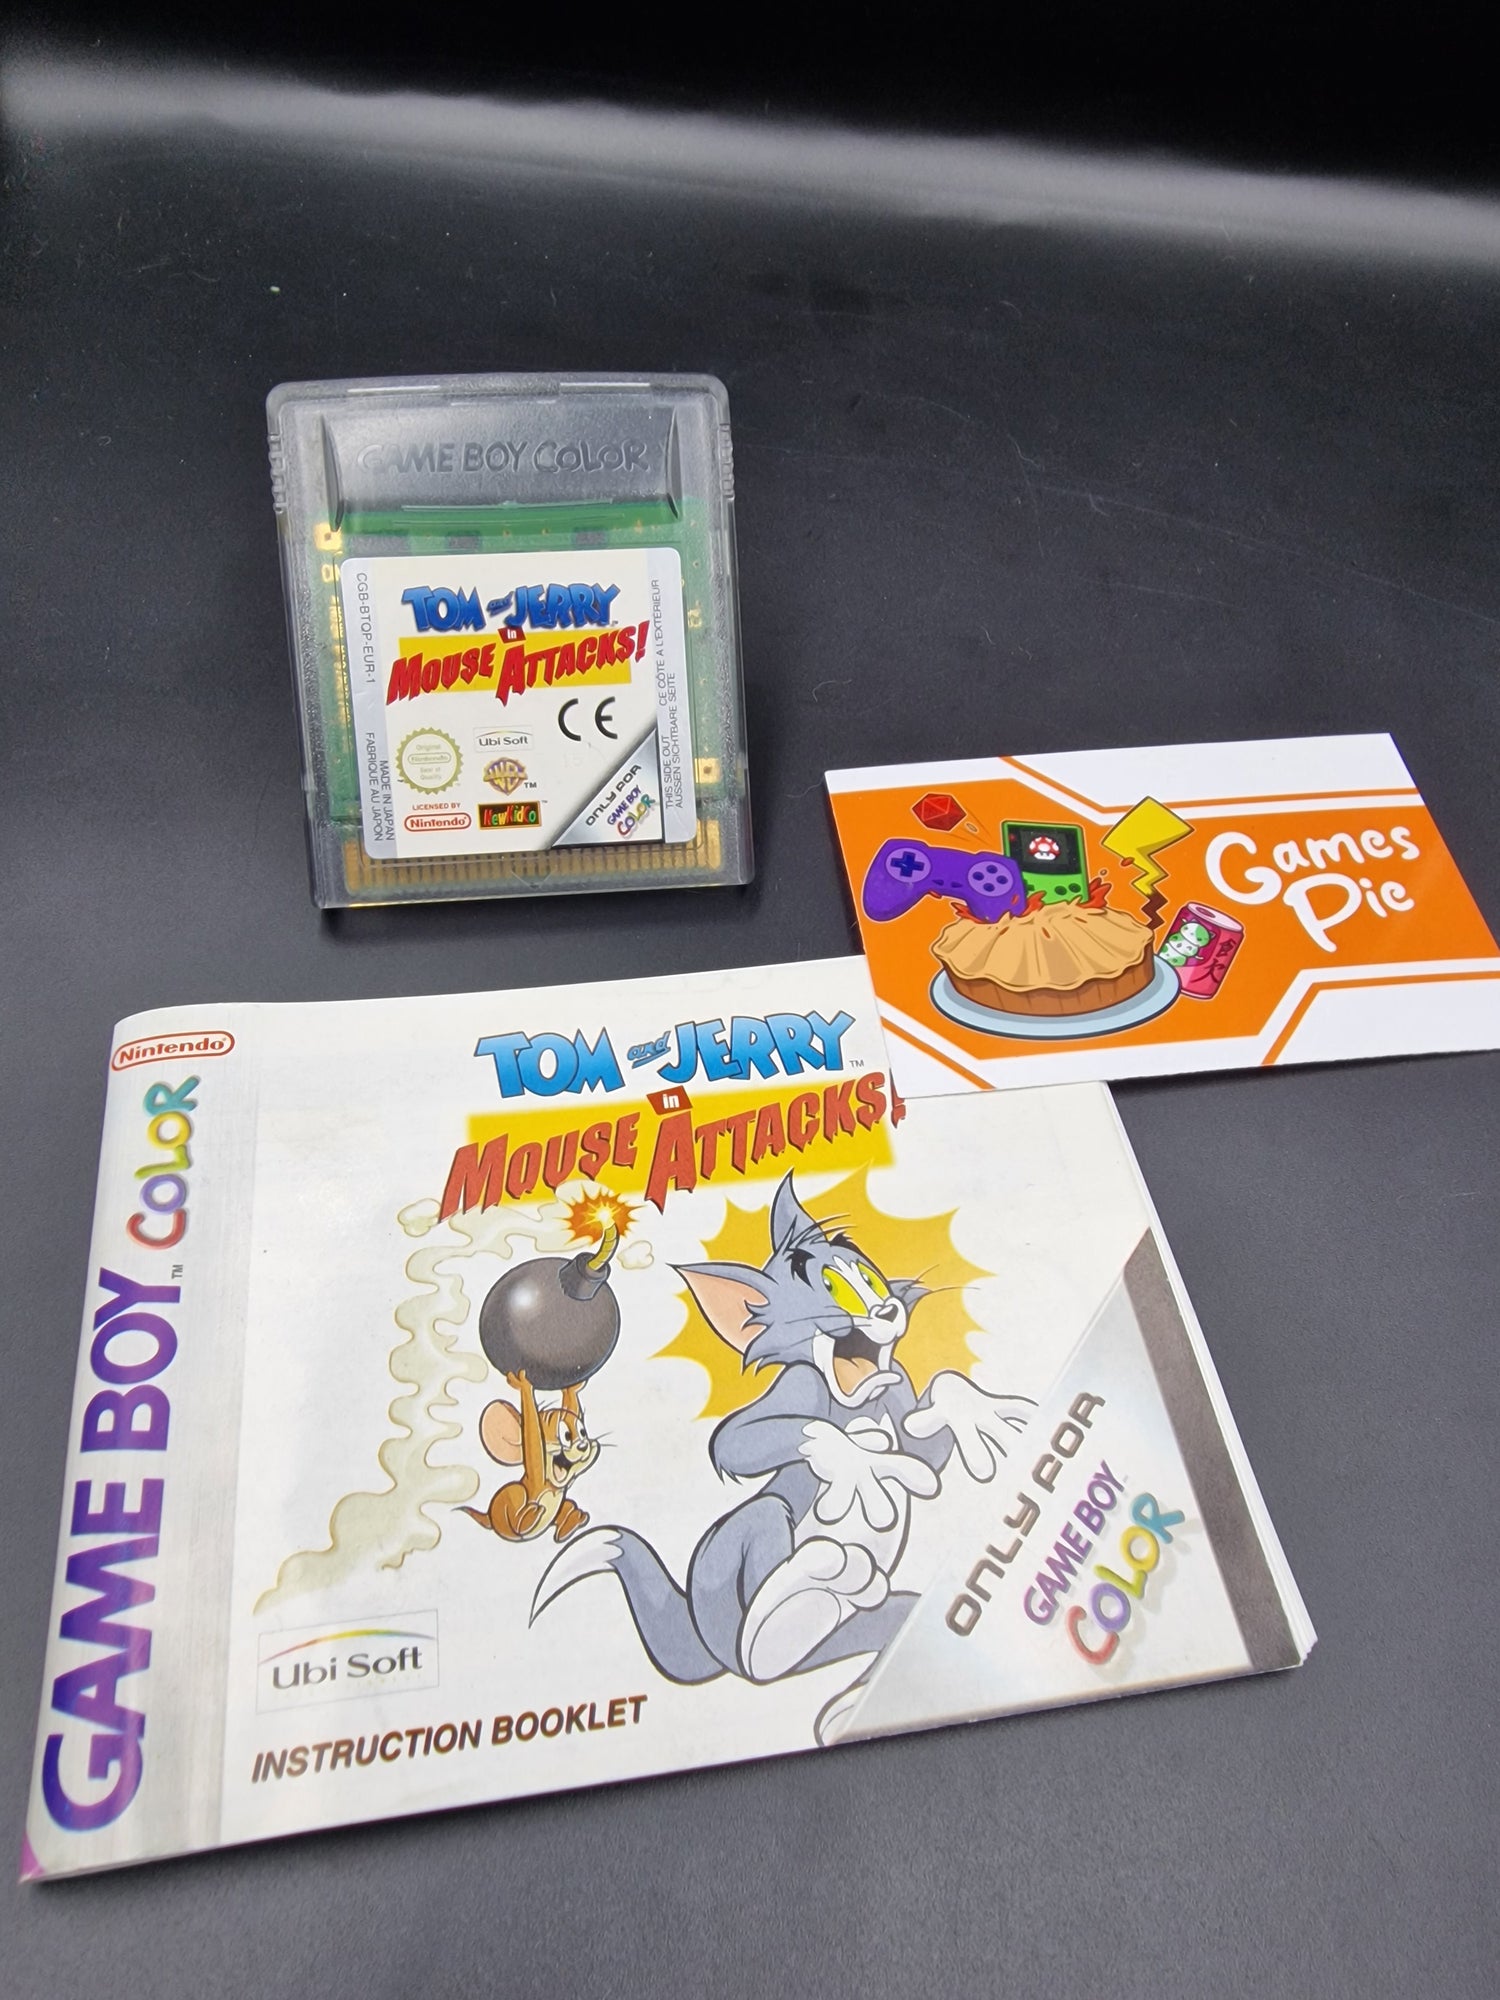 Tom And Jerry In Mouse Attacks! Nintendo Game Boy Color